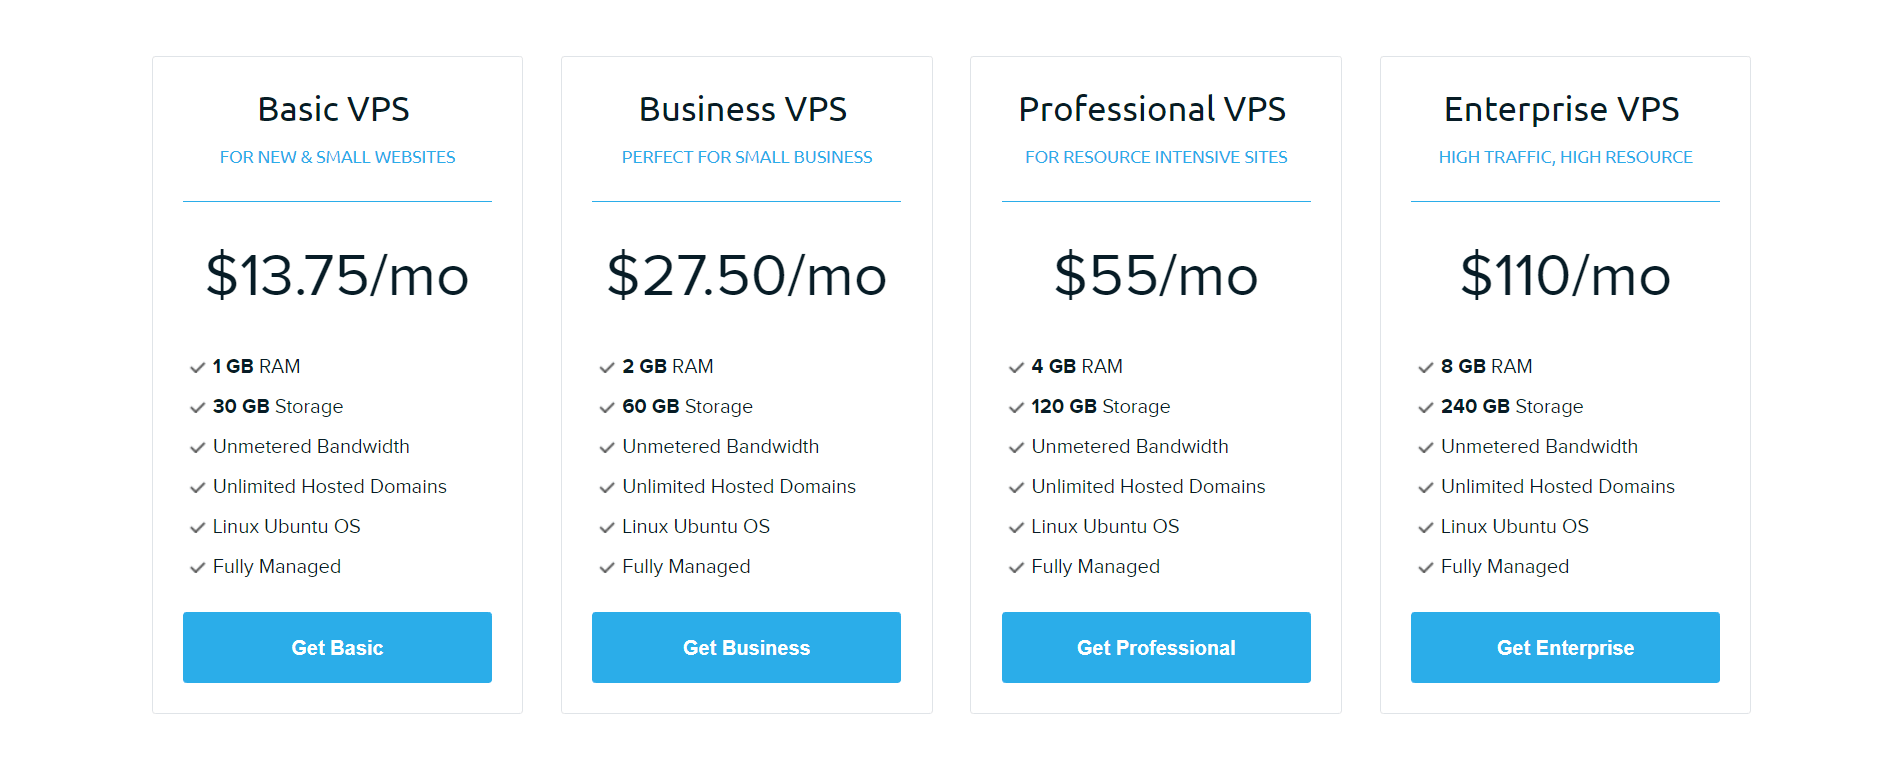 VPS vs shared hosting usually means a price increase